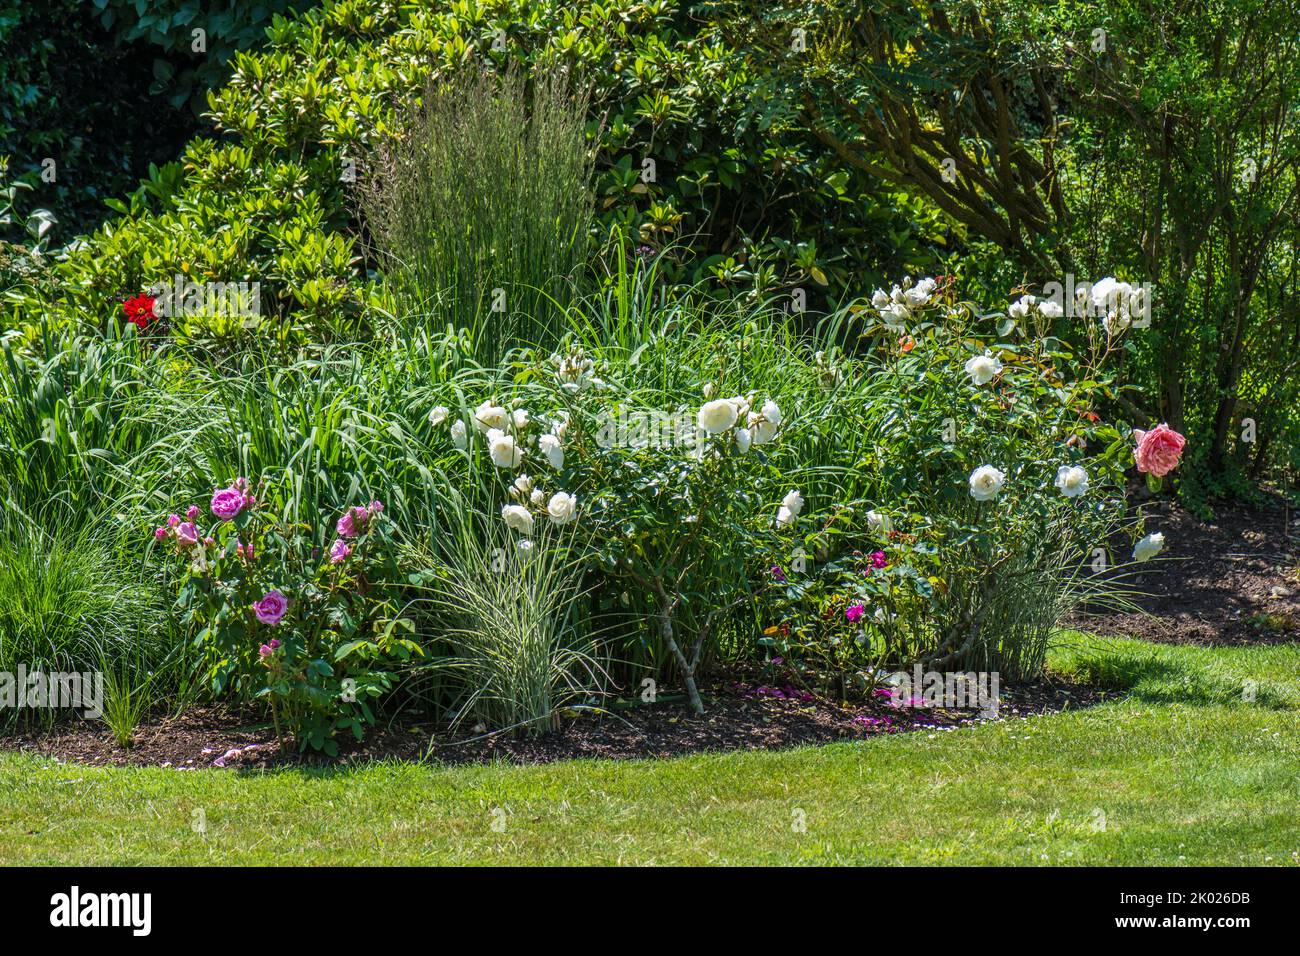 Island garden border of roses and ornamental grasses in a lawn. Stock Photo